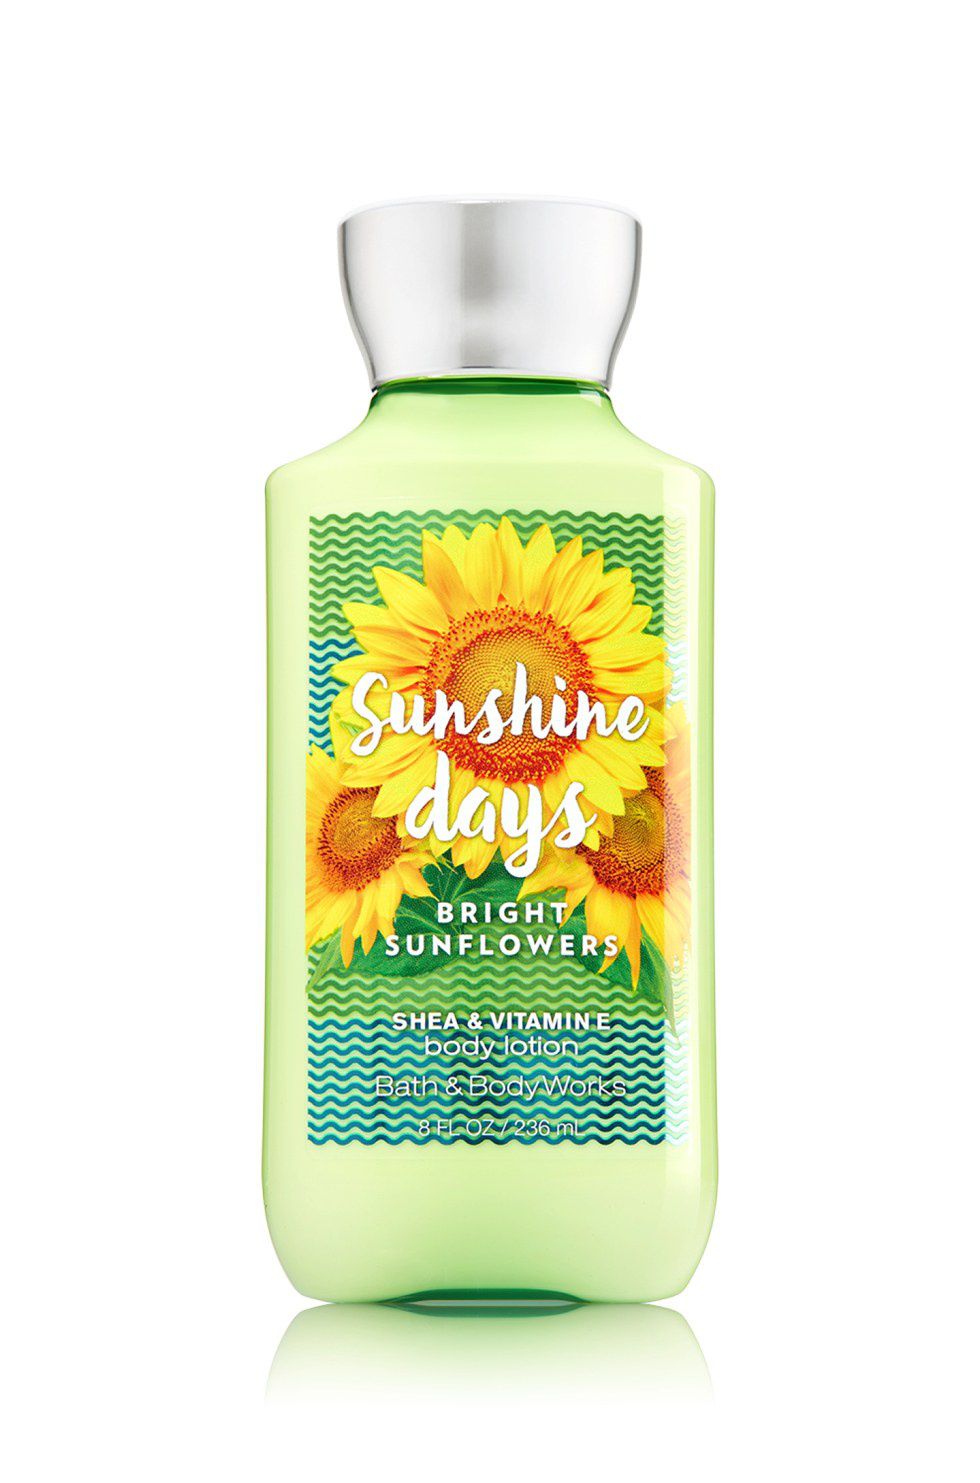 Review Of The New Bath And Body Works Summer Collection